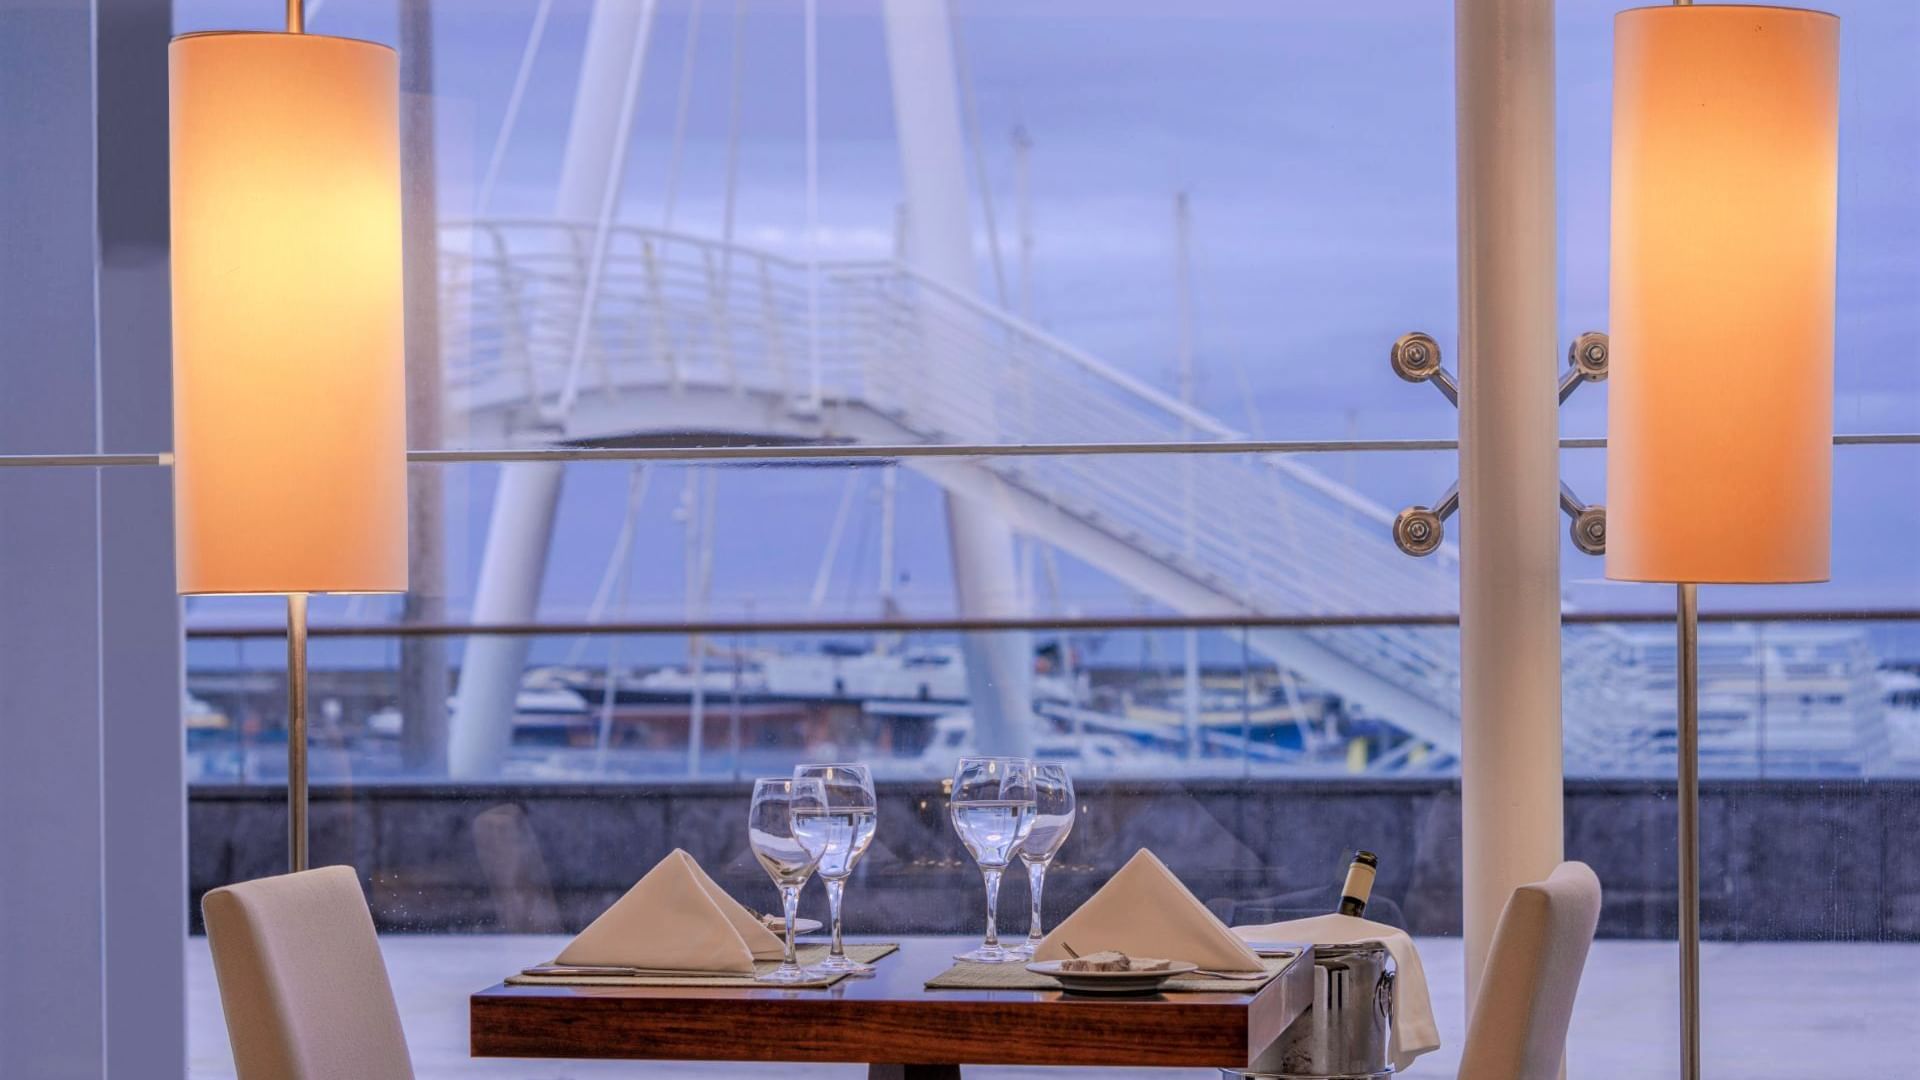 Dining table & harbor view, Escuna Restaurant, Bensaude Hotels